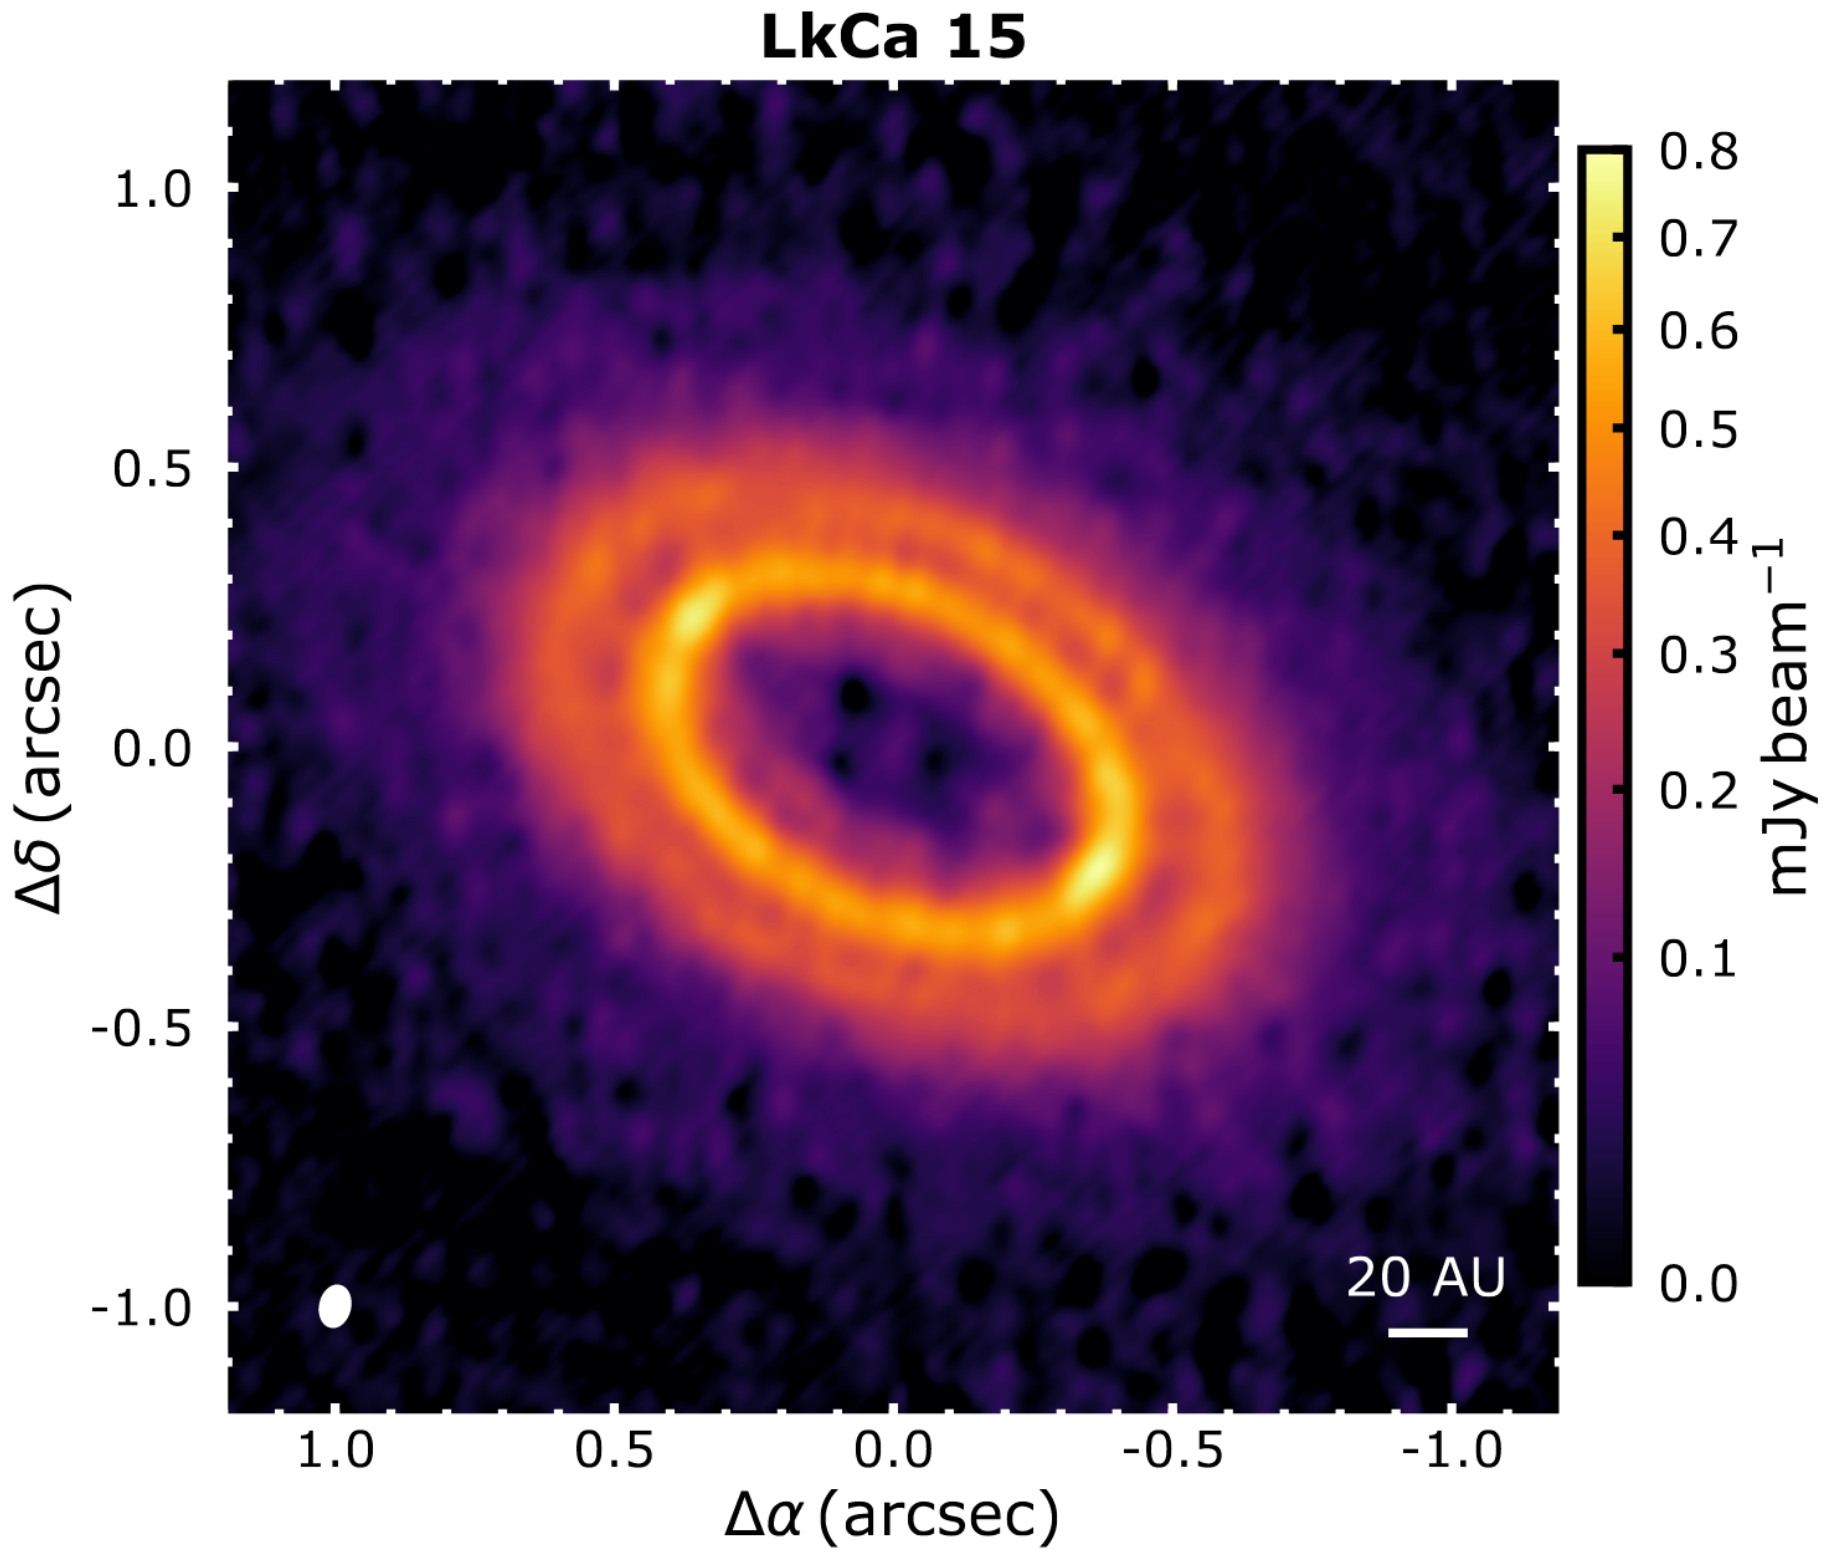 Band 6 continuum image of LkCA 15, published in Facchini et al. (2020), Astronomy & Astrophysics